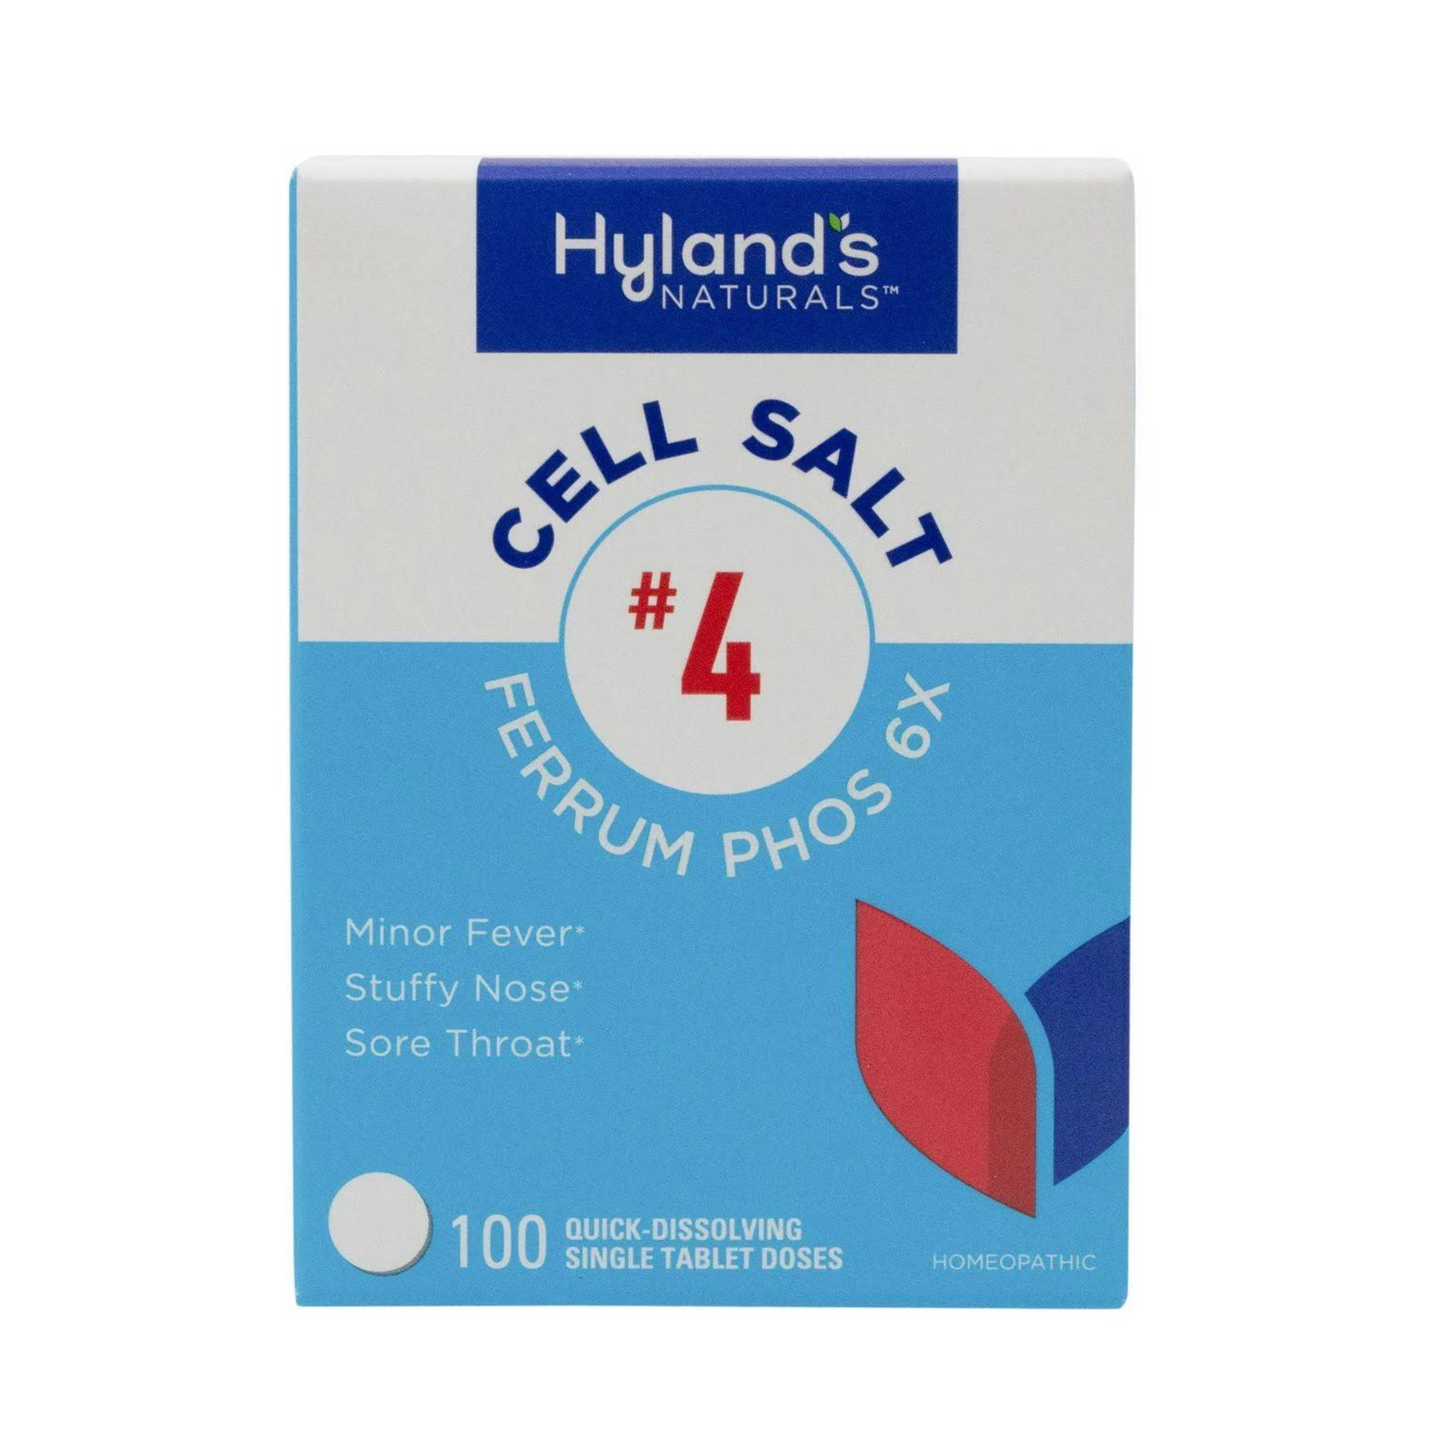 Primary Image of Hyland's Cell Salt Ferrum Phos 6x Tablets (100 count)